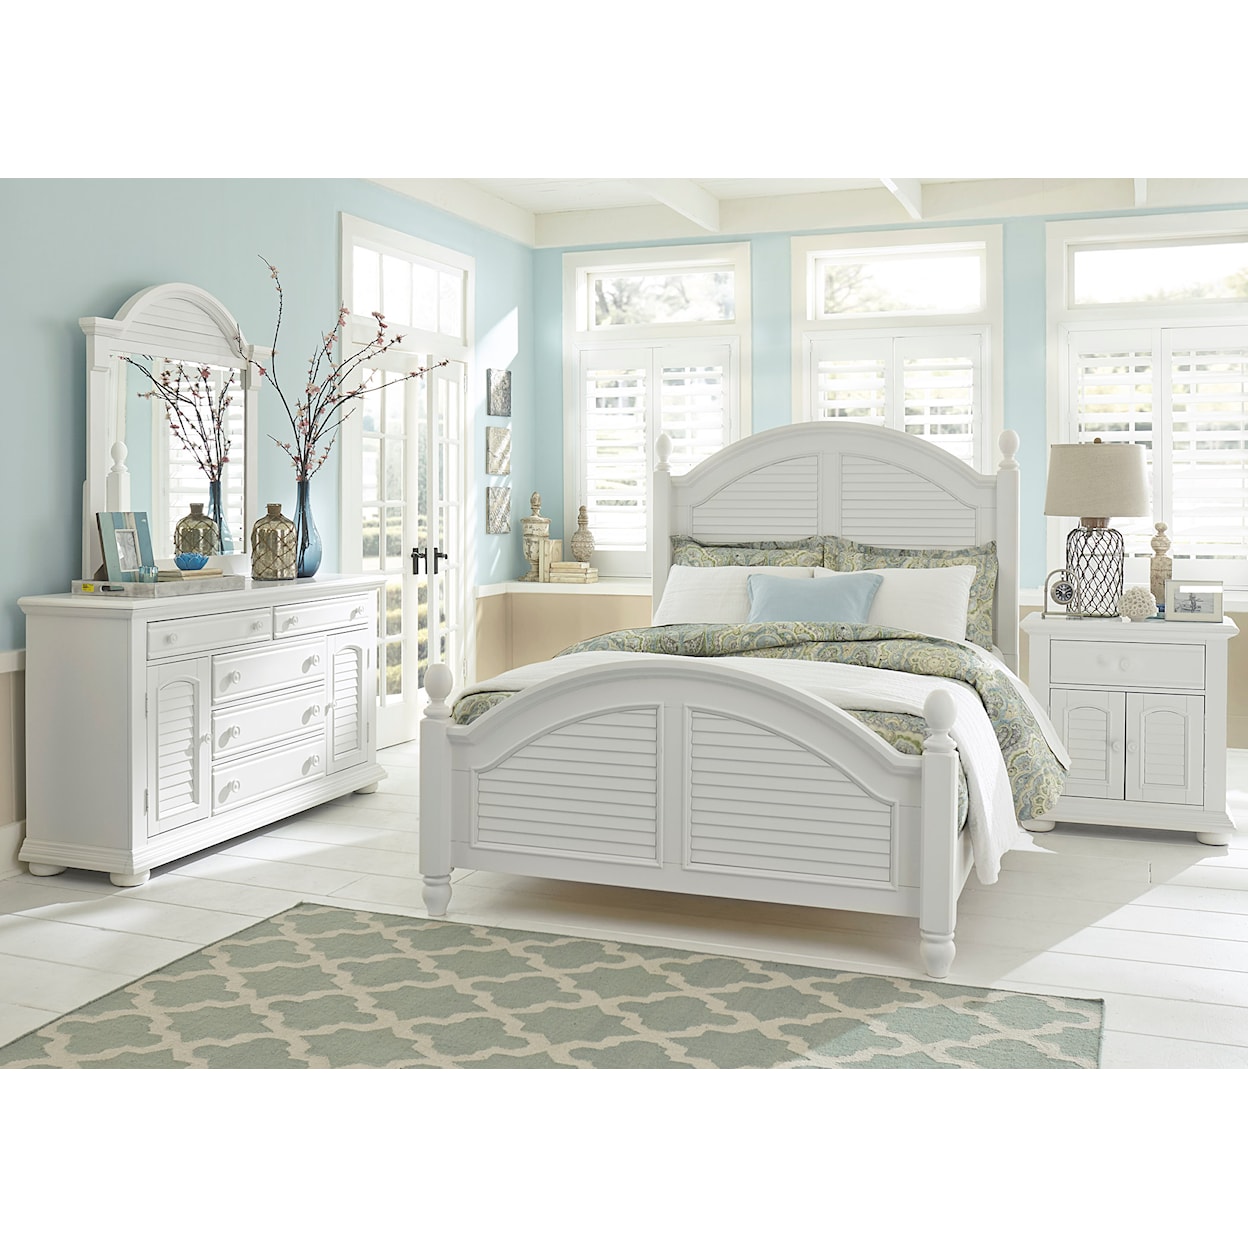 Liberty Furniture Summer House King Bedroom Group